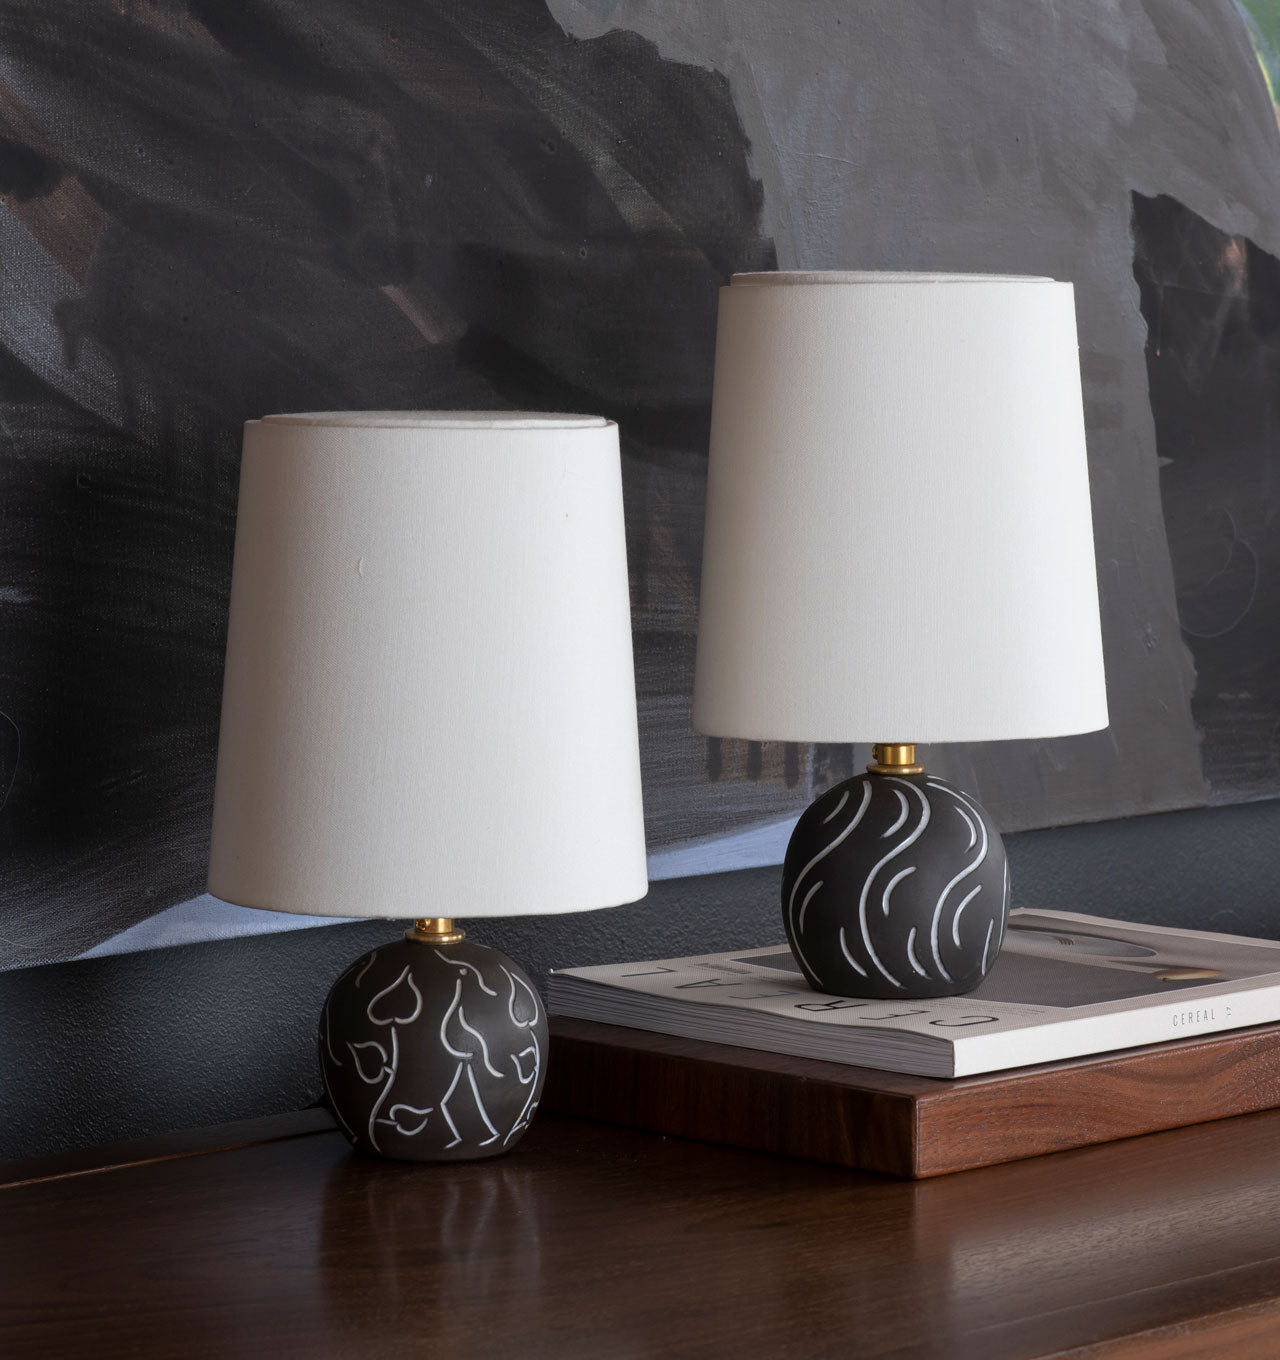 Incised Mini Table Lamps